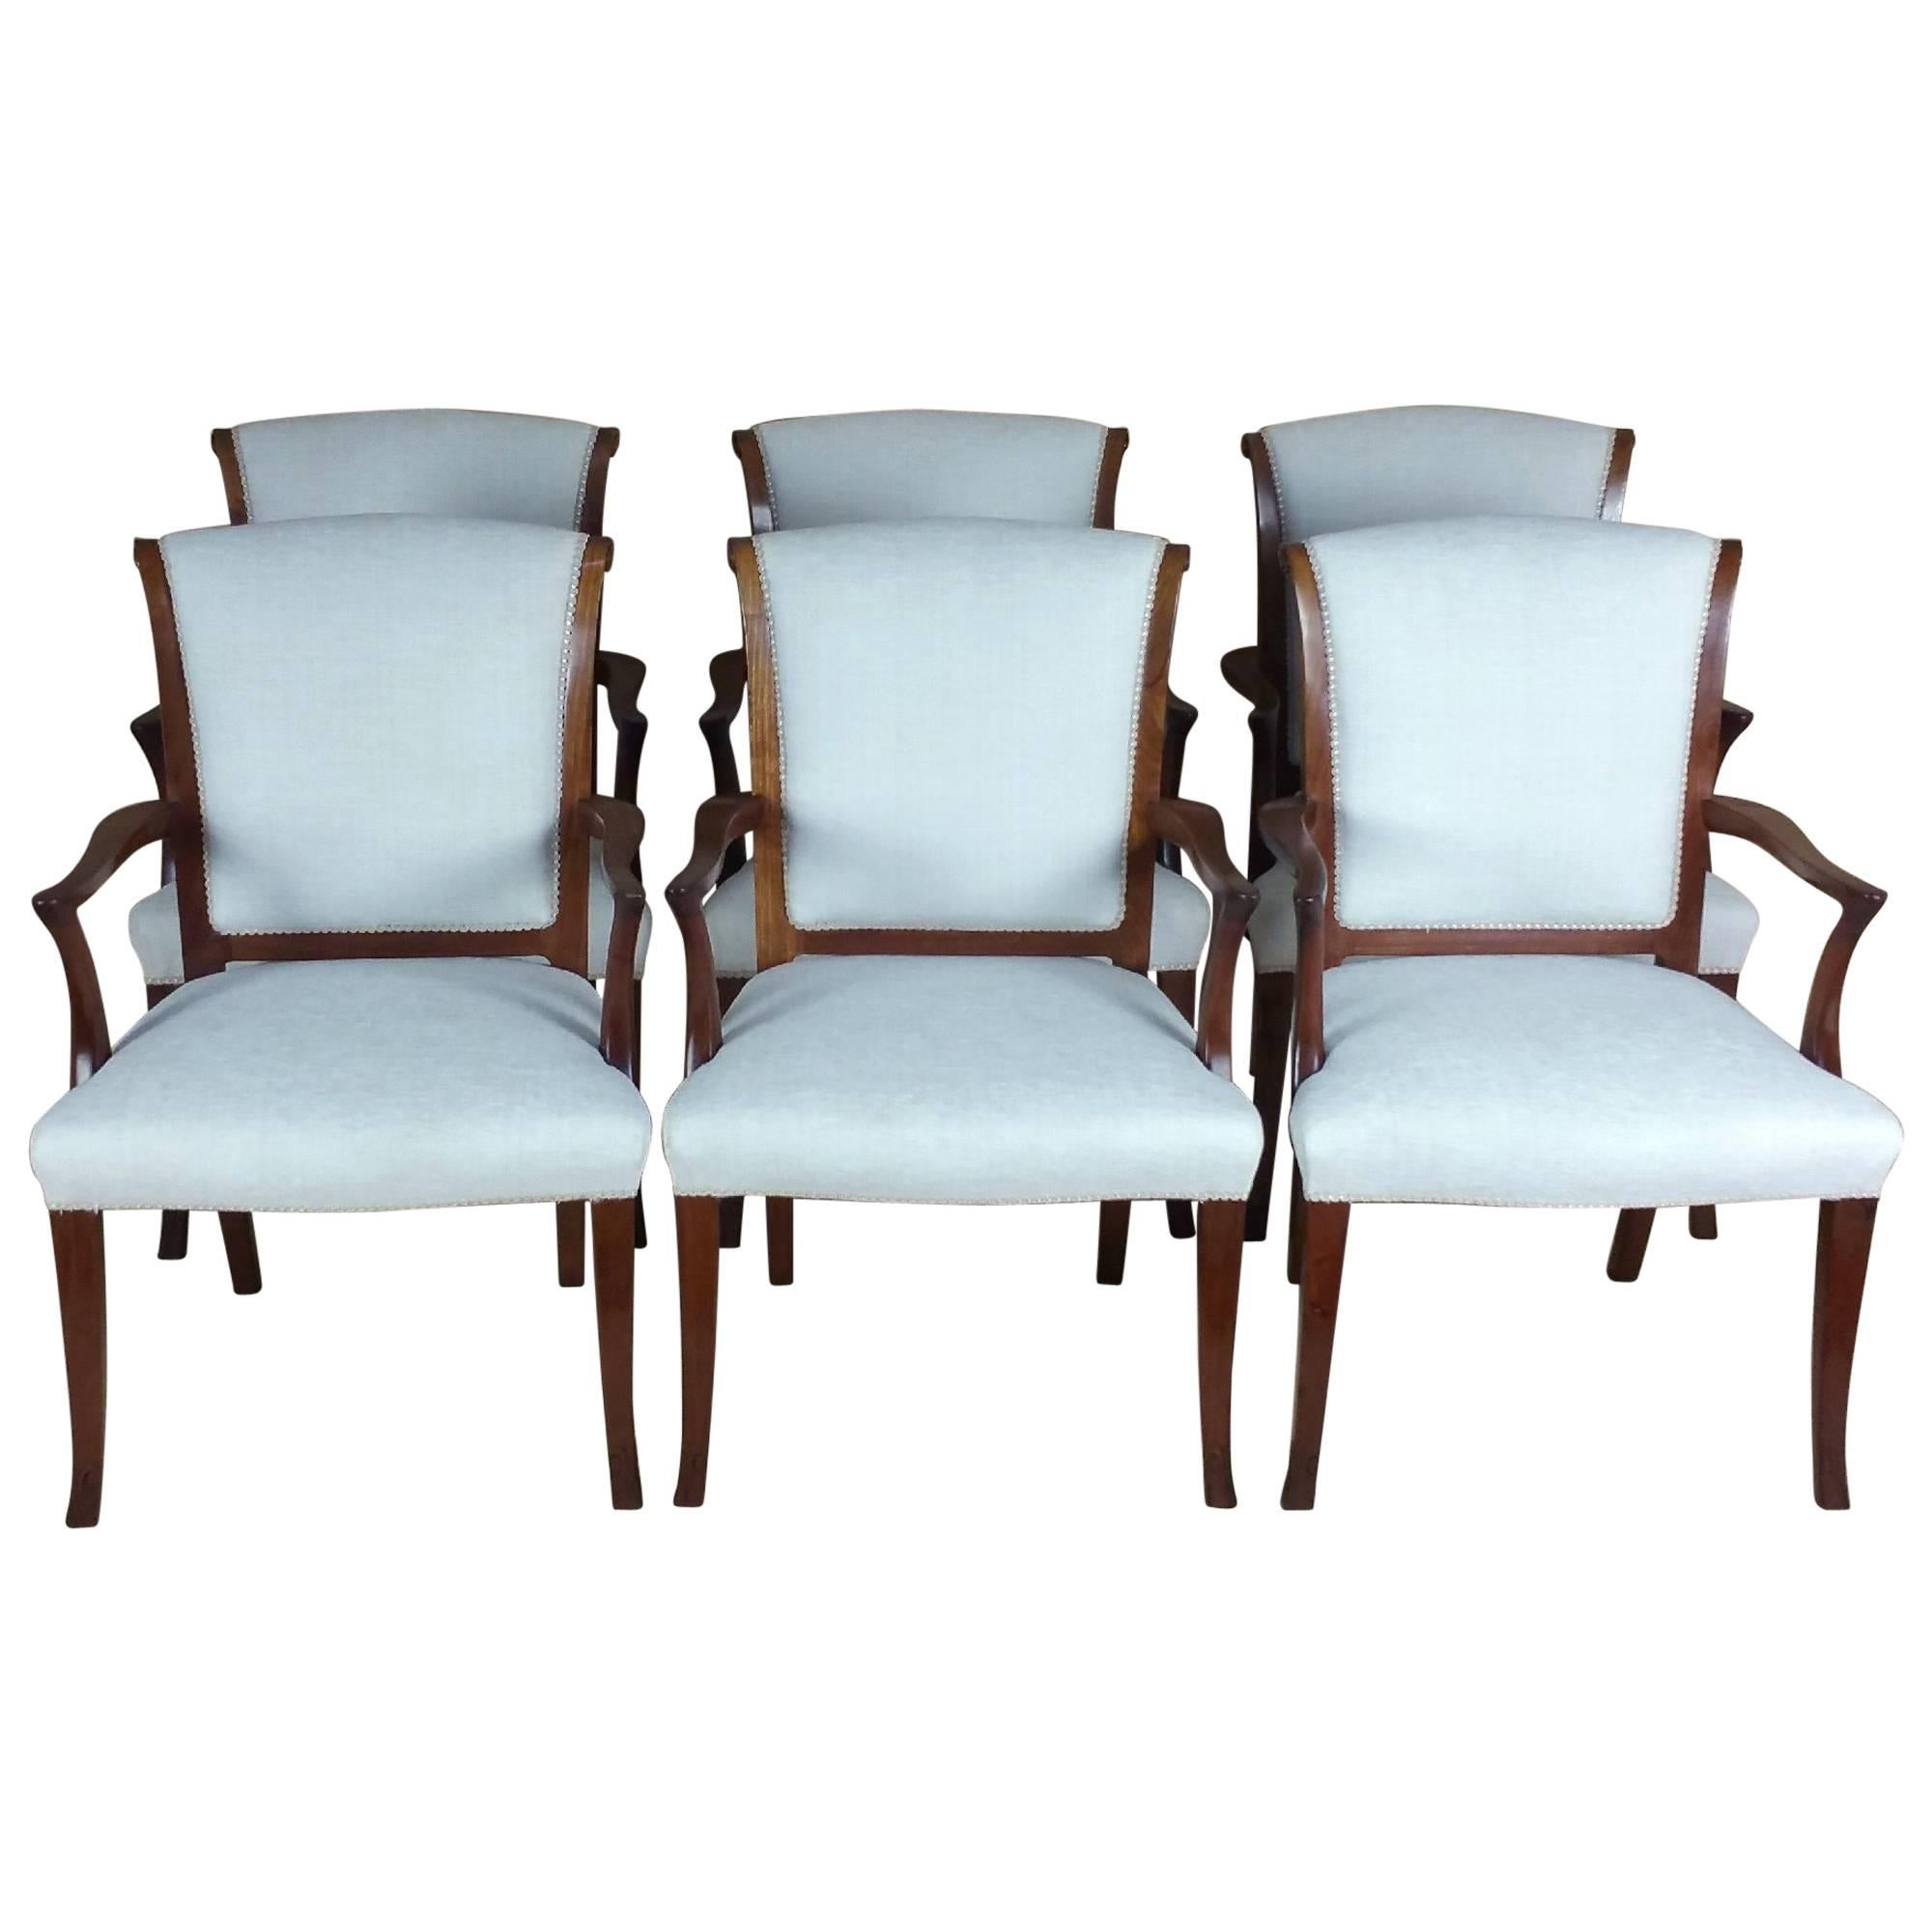 Set of Six Early 20th Century Teak Elbow Chairs